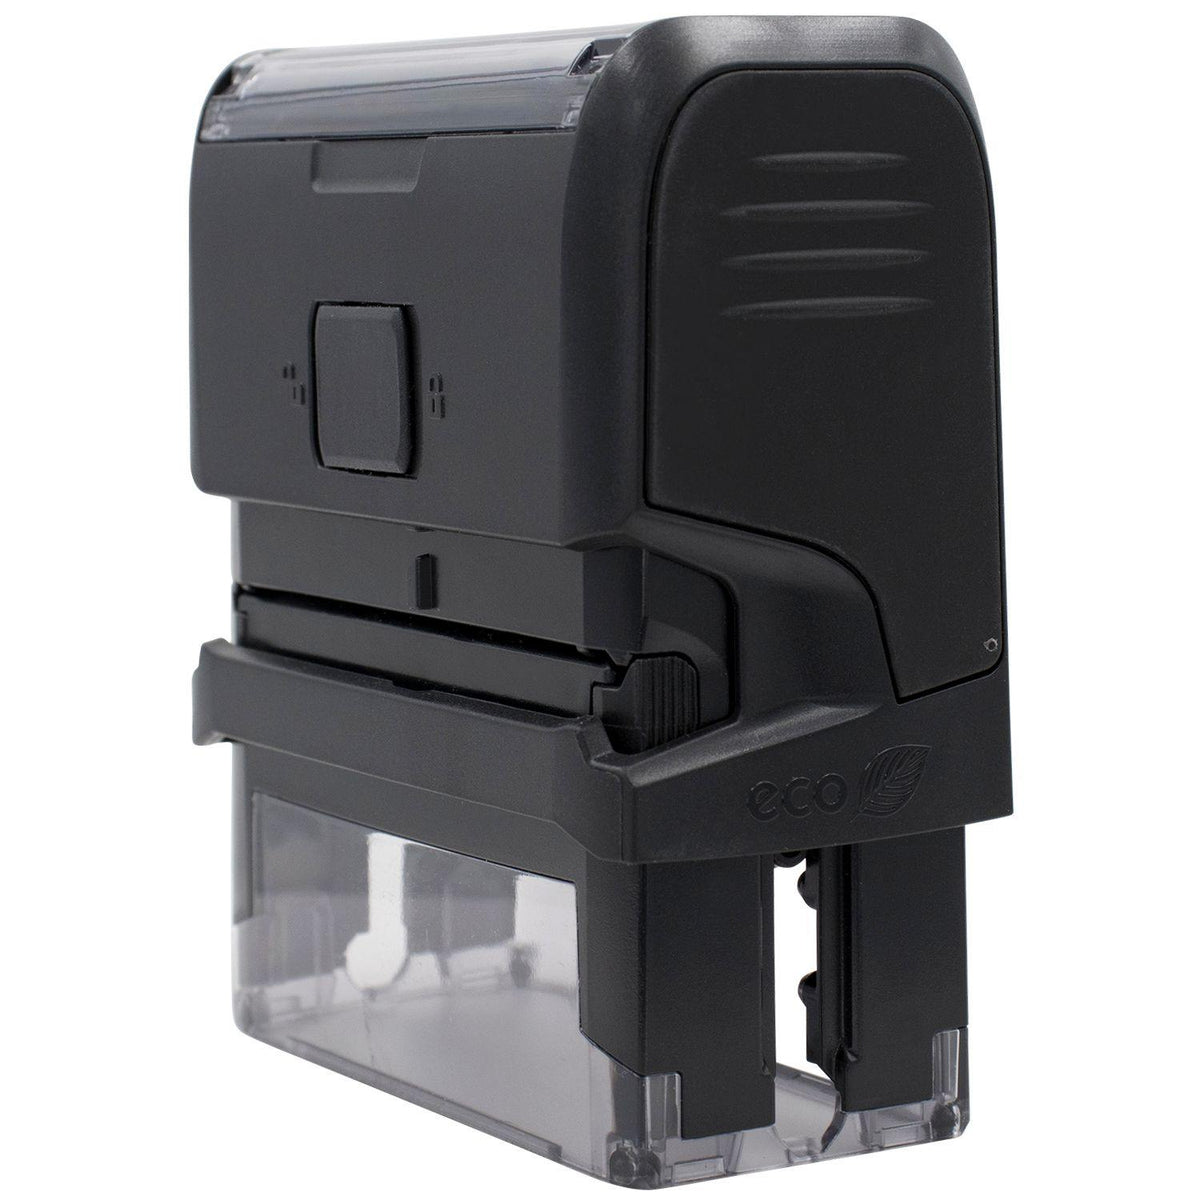 Self-Inking Signed with Date Stamp - Engineer Seal Stamps - Brand_Trodat, Impression Size_Small, Stamp Type_Self-Inking Stamp, Type of Use_General, Type of Use_Office, Type of Use_Teacher